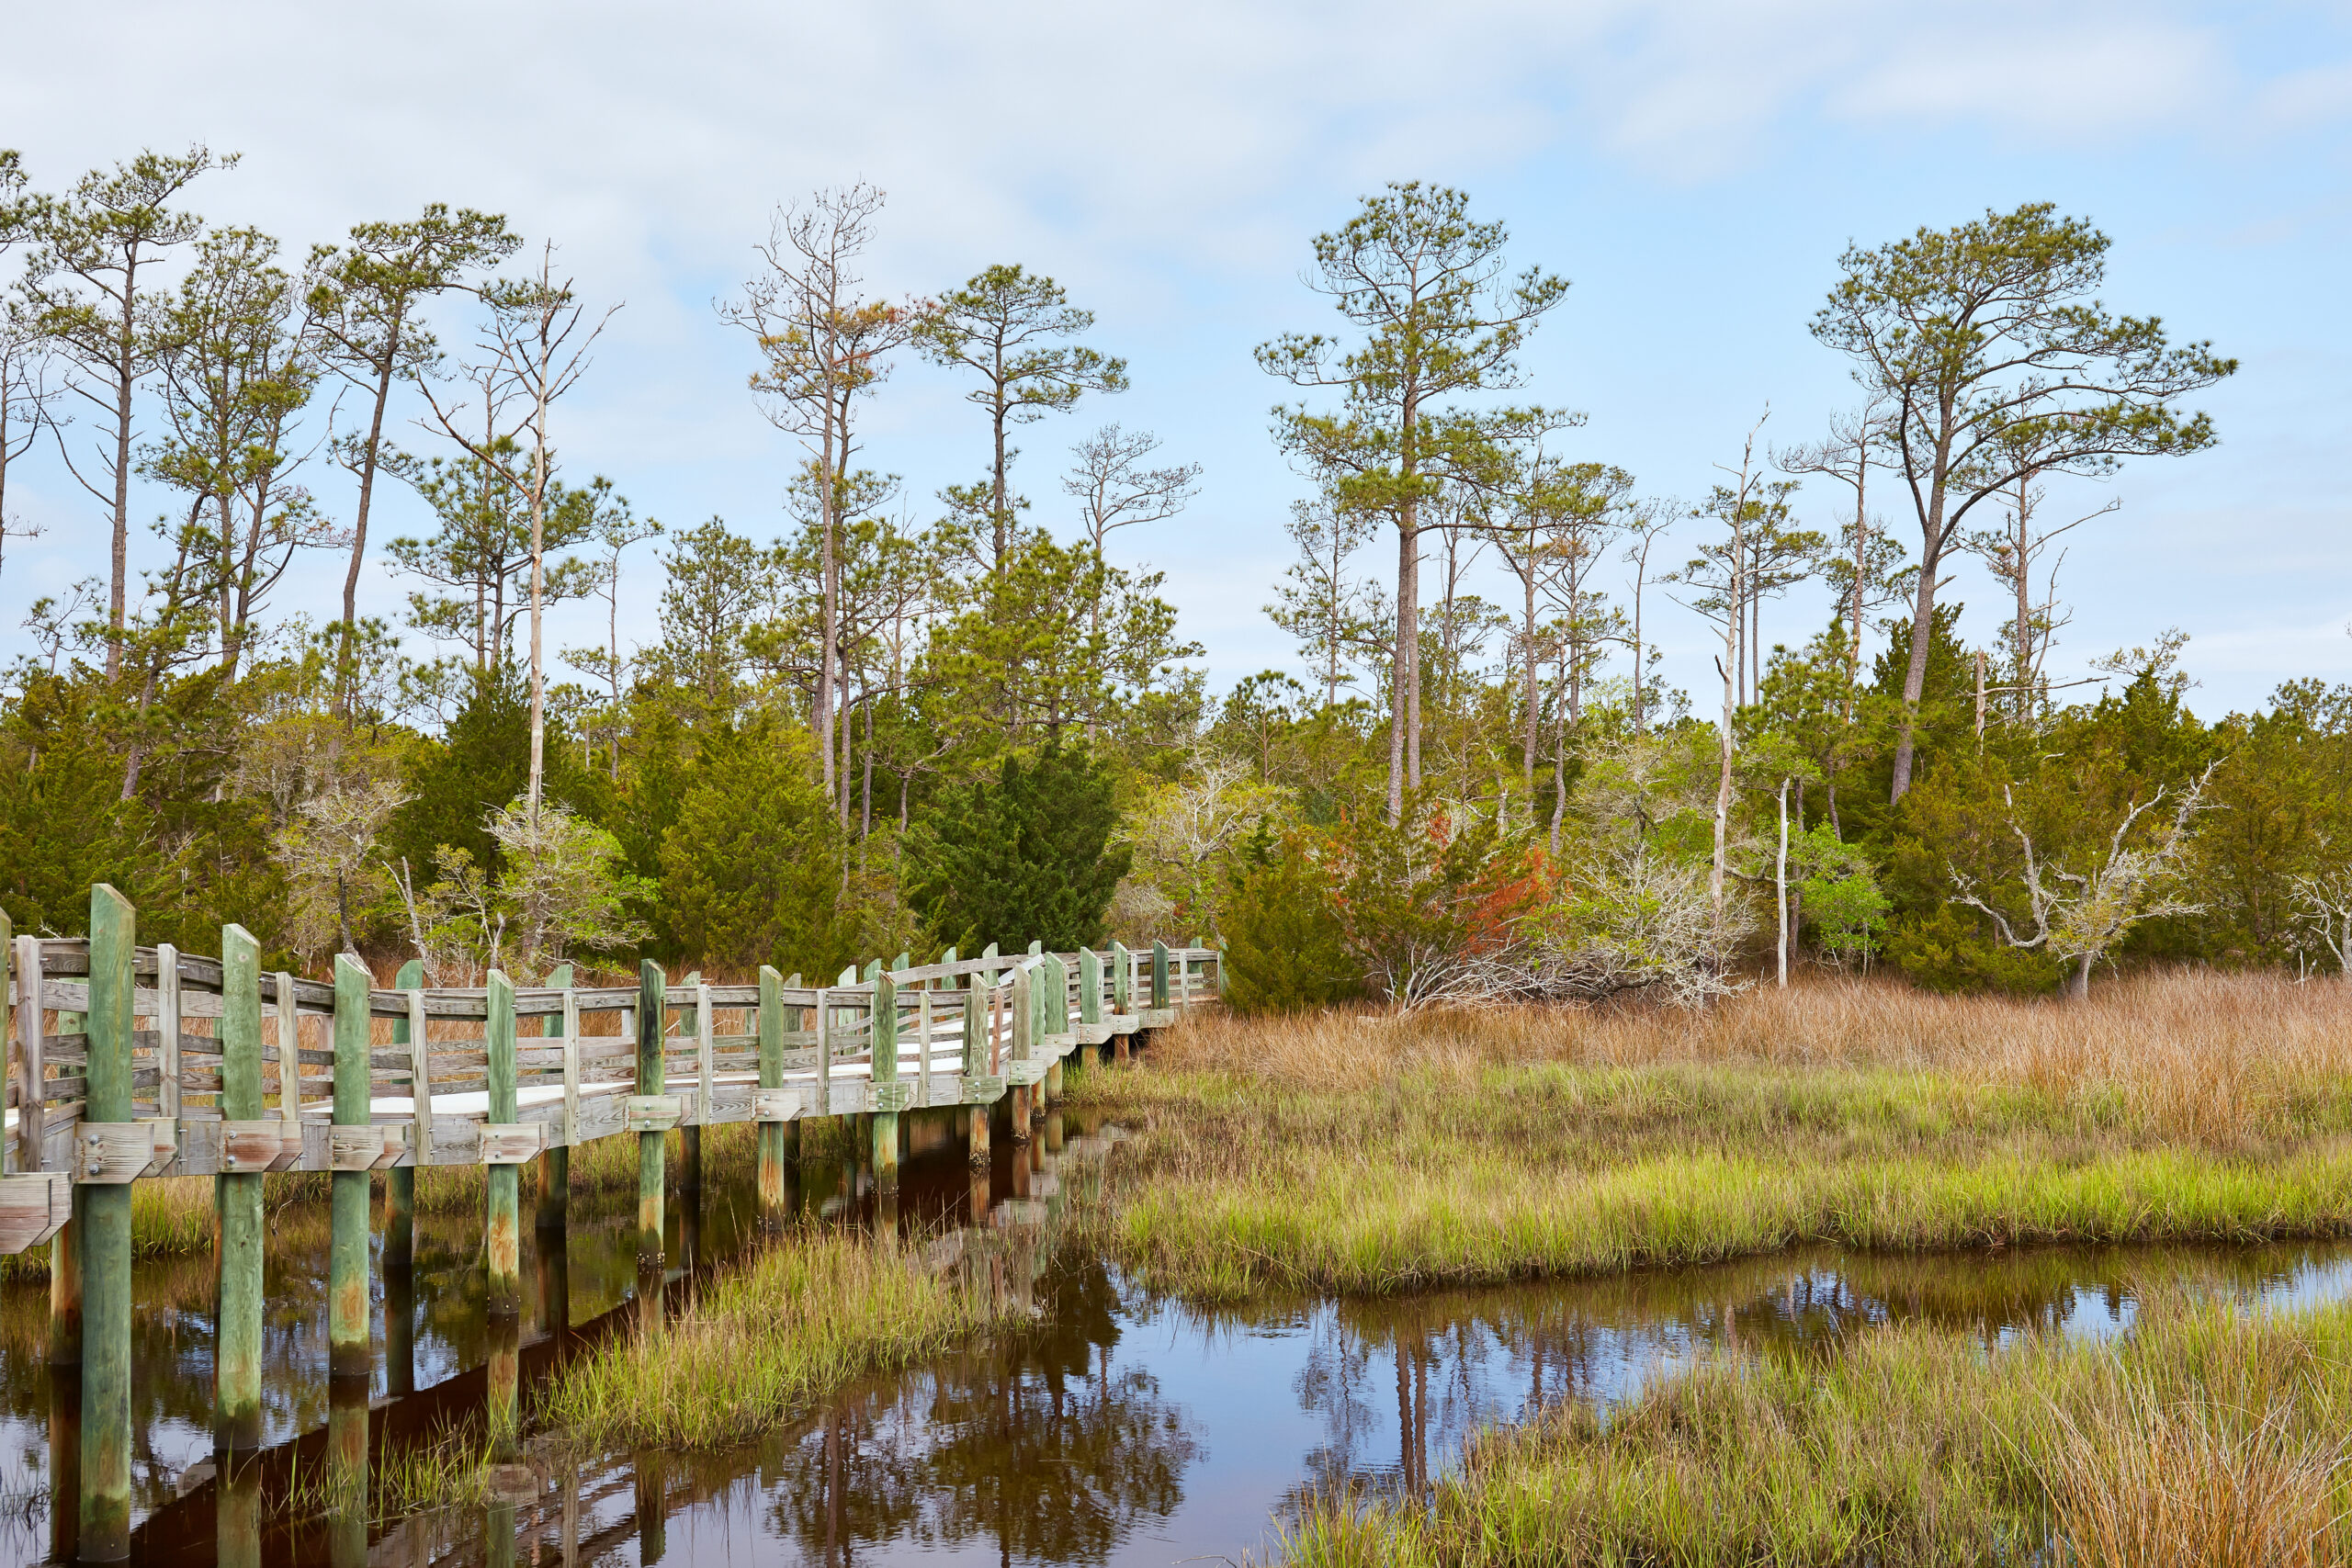 image: boardwalk through a marsh with standing water.